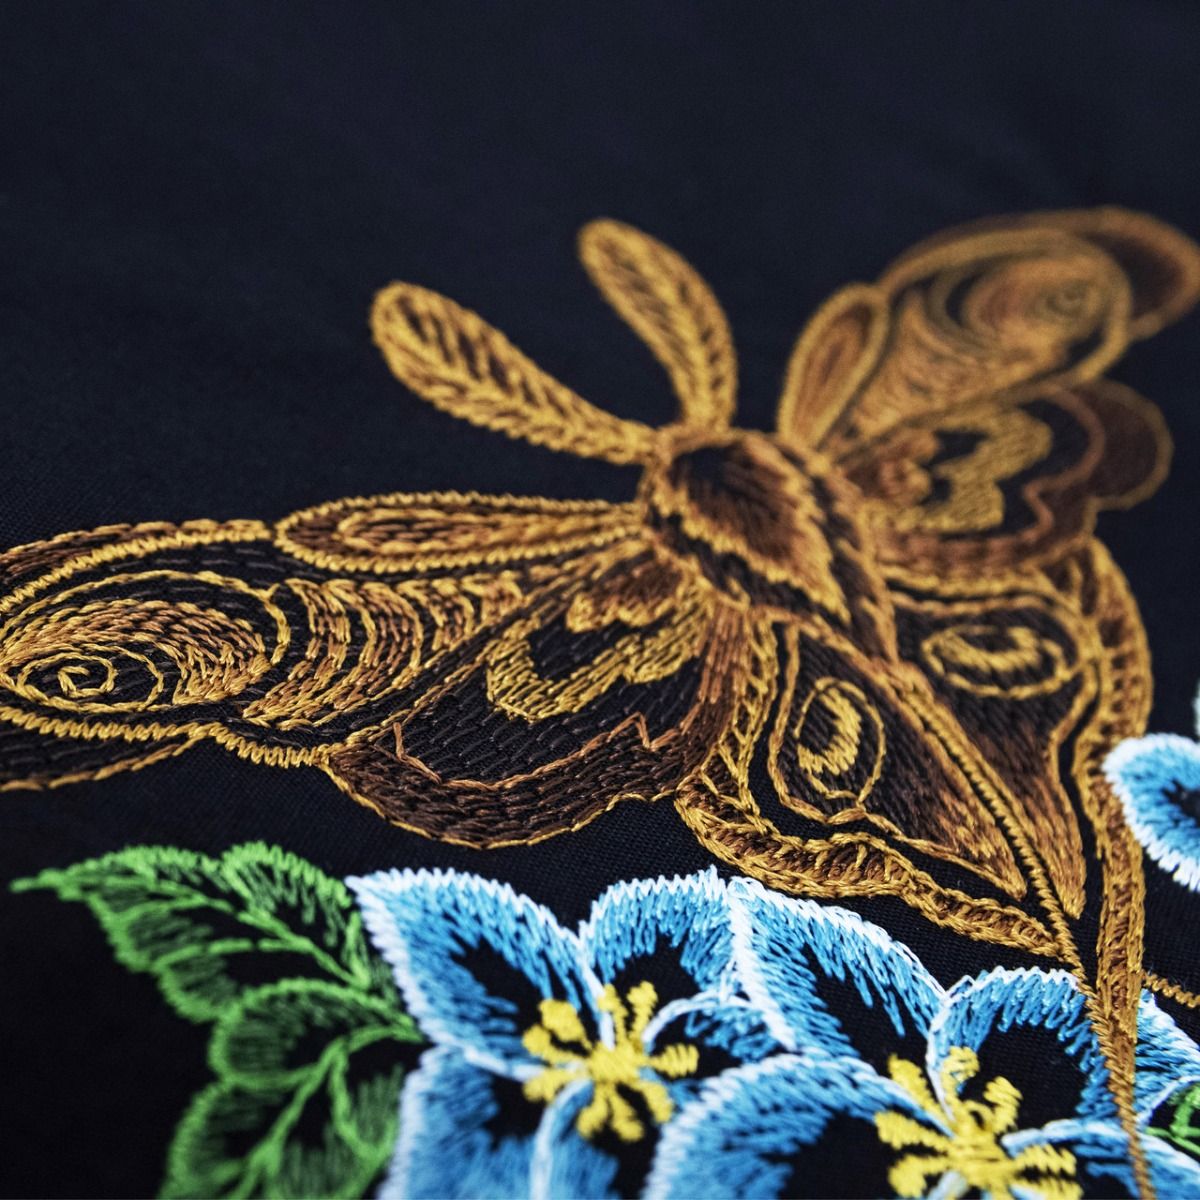 Moonlit Wings Embroidery Collection by Scissortail Stitches
,Moonlit Wings Embroidery Collection by Scissortail Stitches
,Moonlit Wings Embroidery Collection by Scissortail Stitches
,Moonlit Wings Embroidery Collection by Scissortail Stitches
